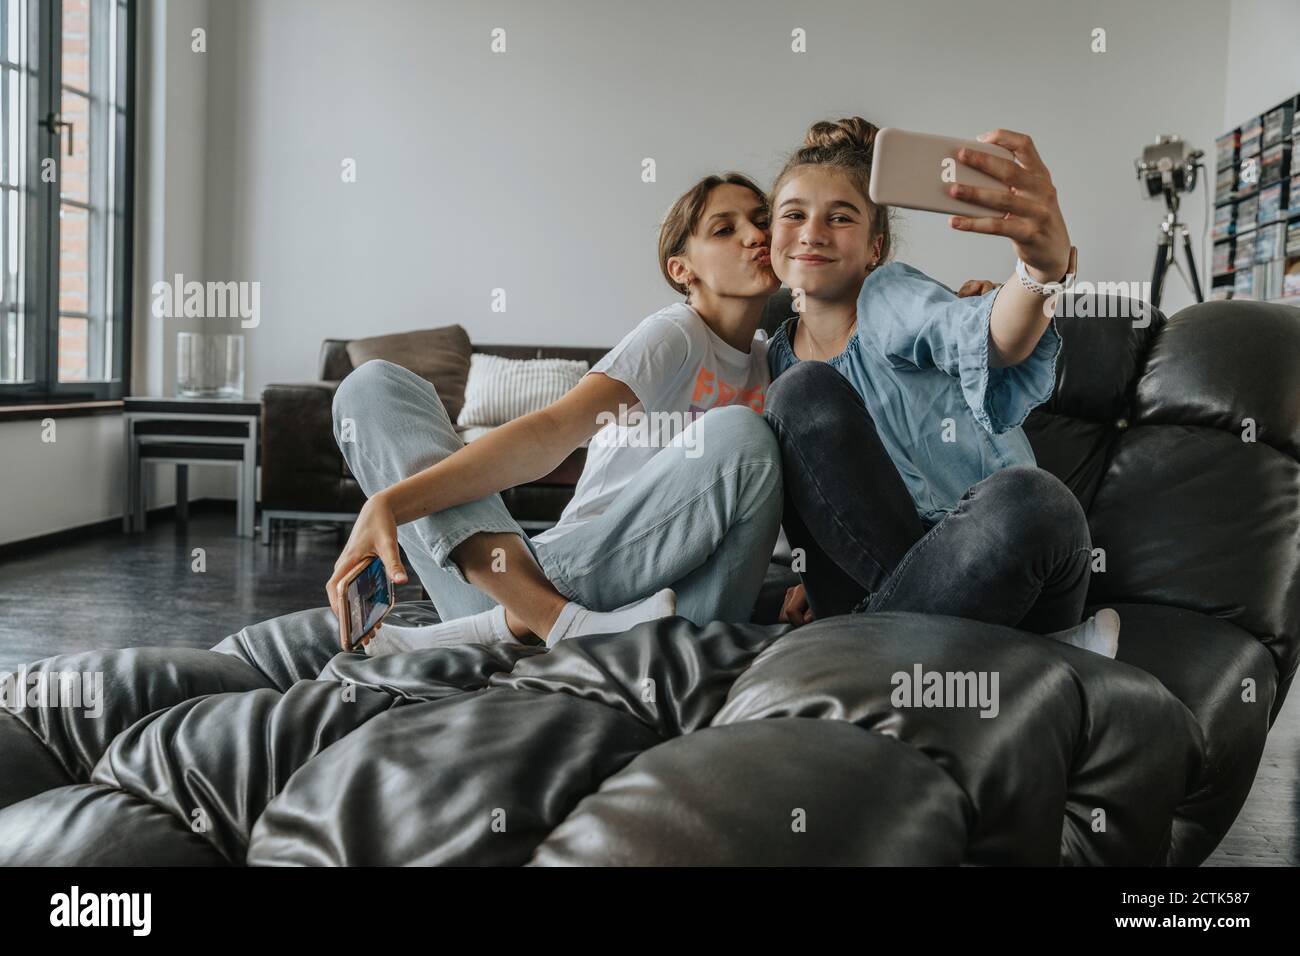 Friends taking selfie with smart phone while sitting on couch at home Stock Photo